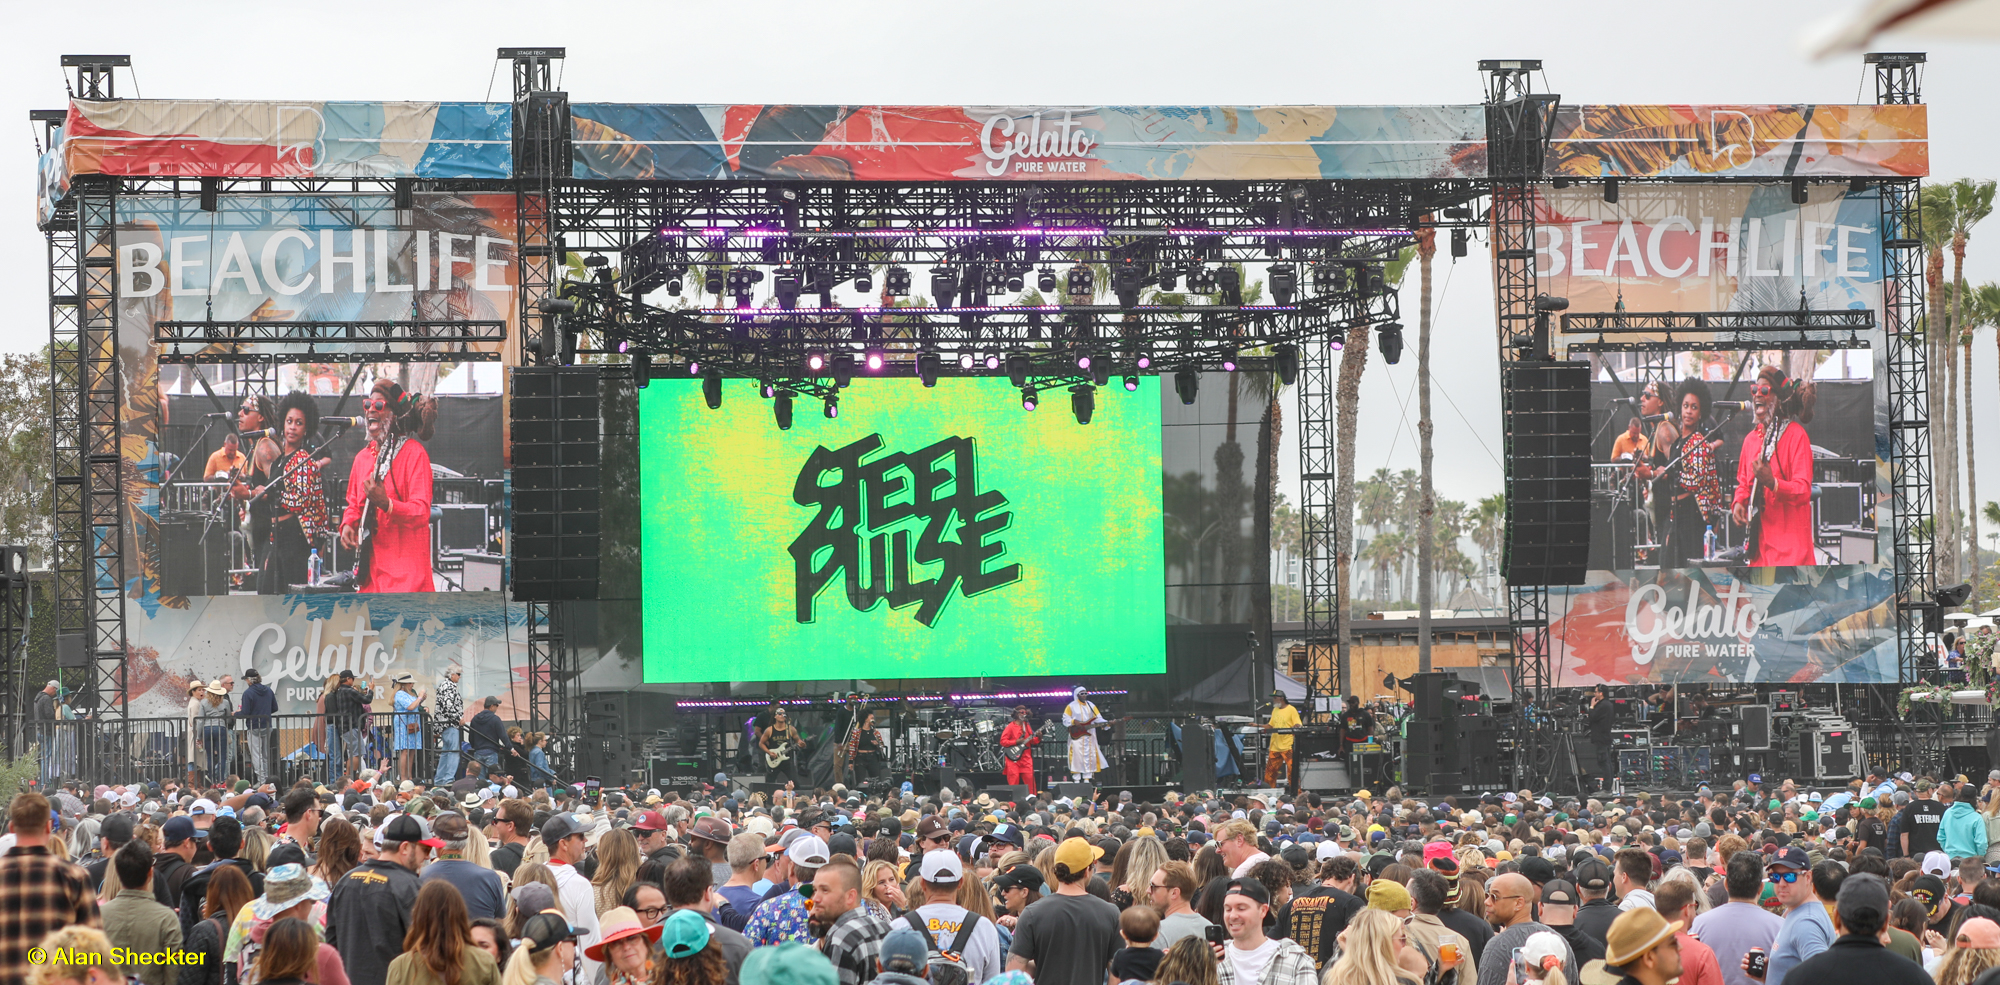 Steel Pulse from a distance | Beachlife Festival